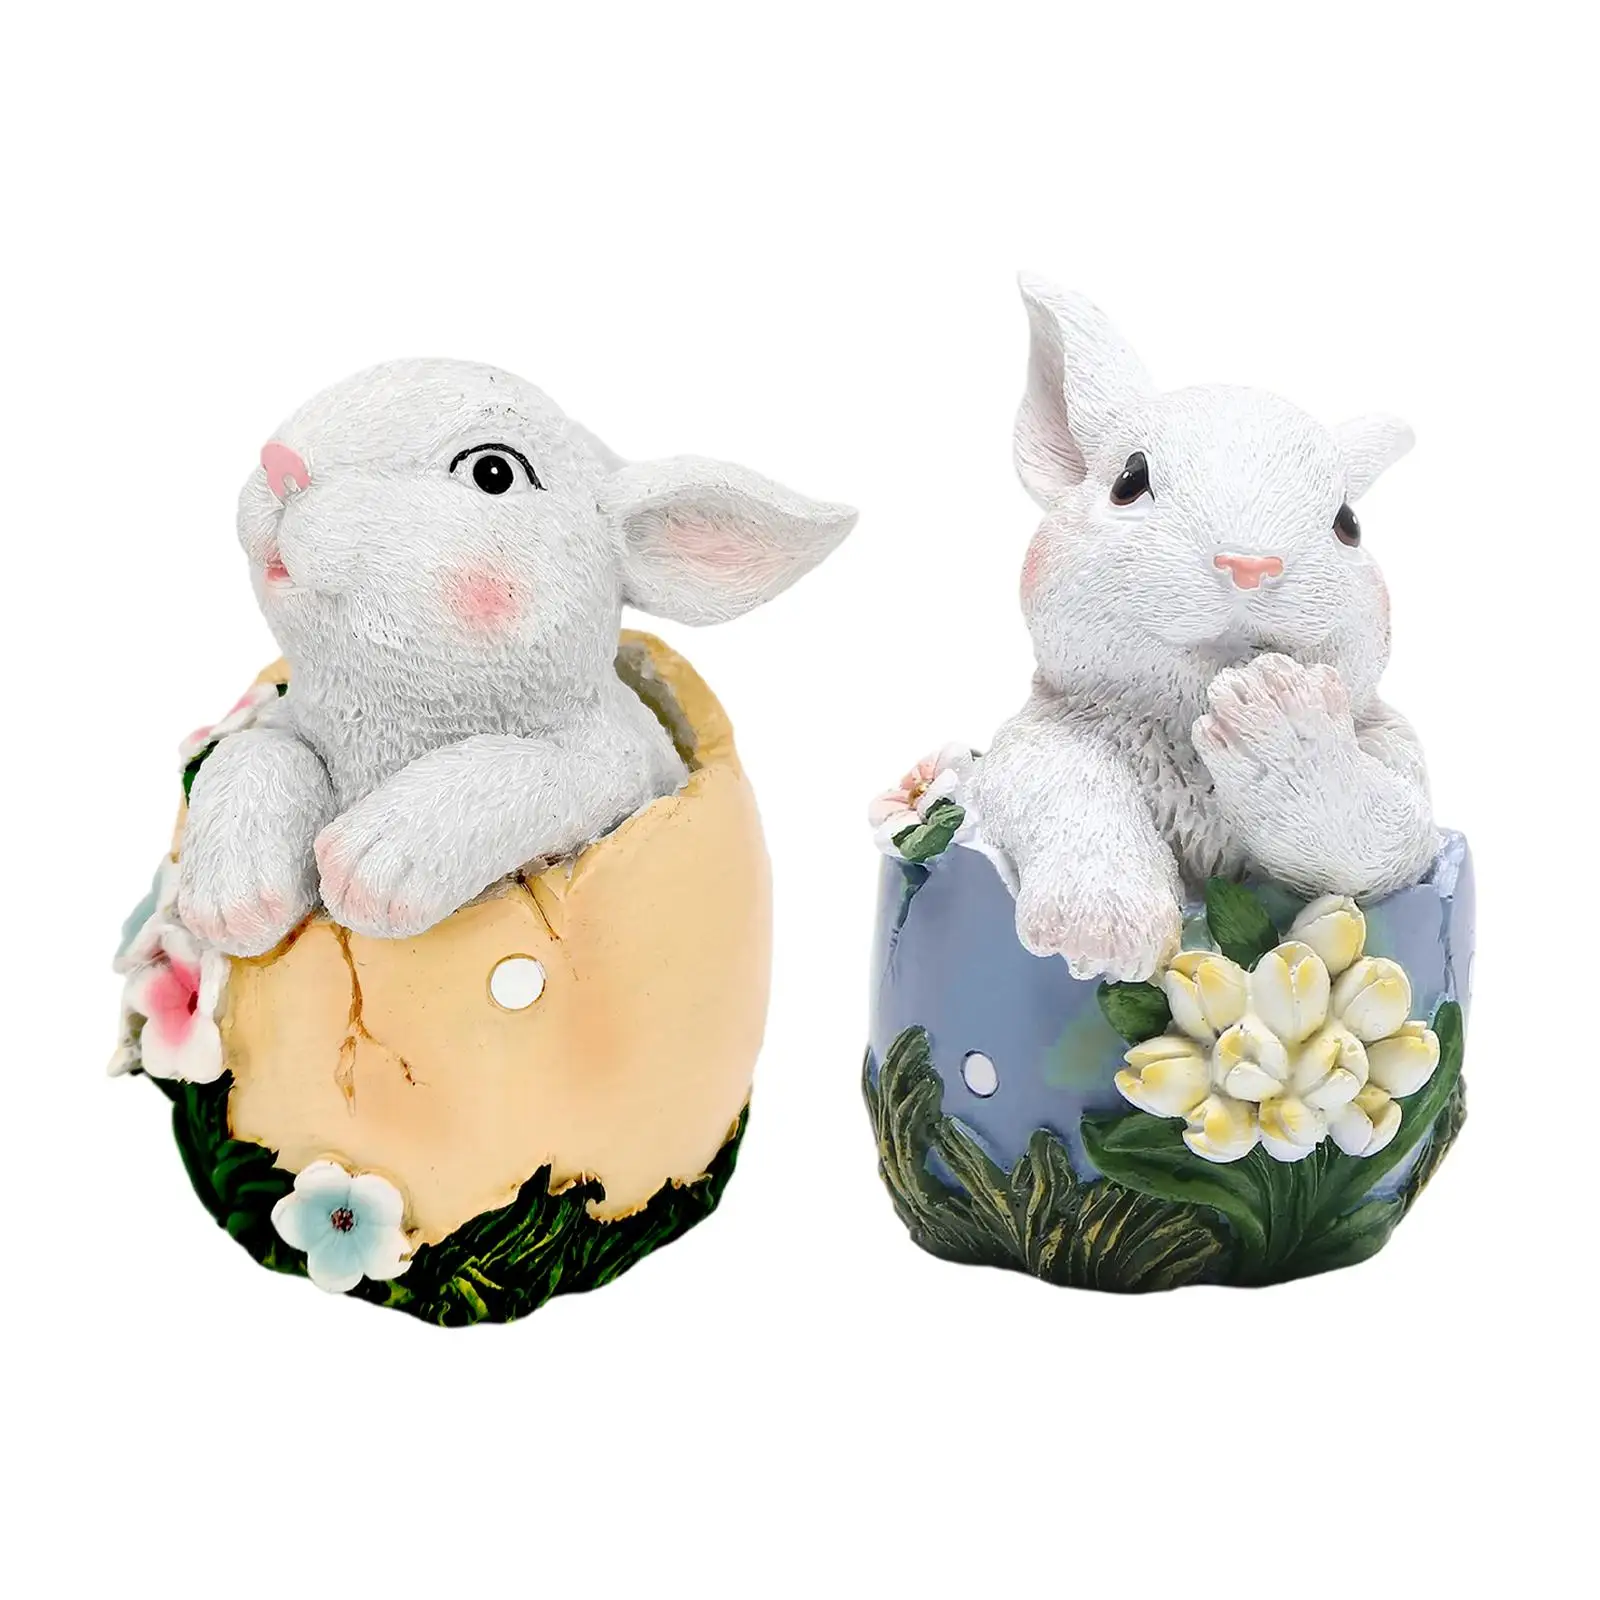 Lovely Easter Bunny Egg Figurines Rabbit Statue Animal Model Resin Art Crafts for TV Cabinet Party Tabletop Garden Ornament